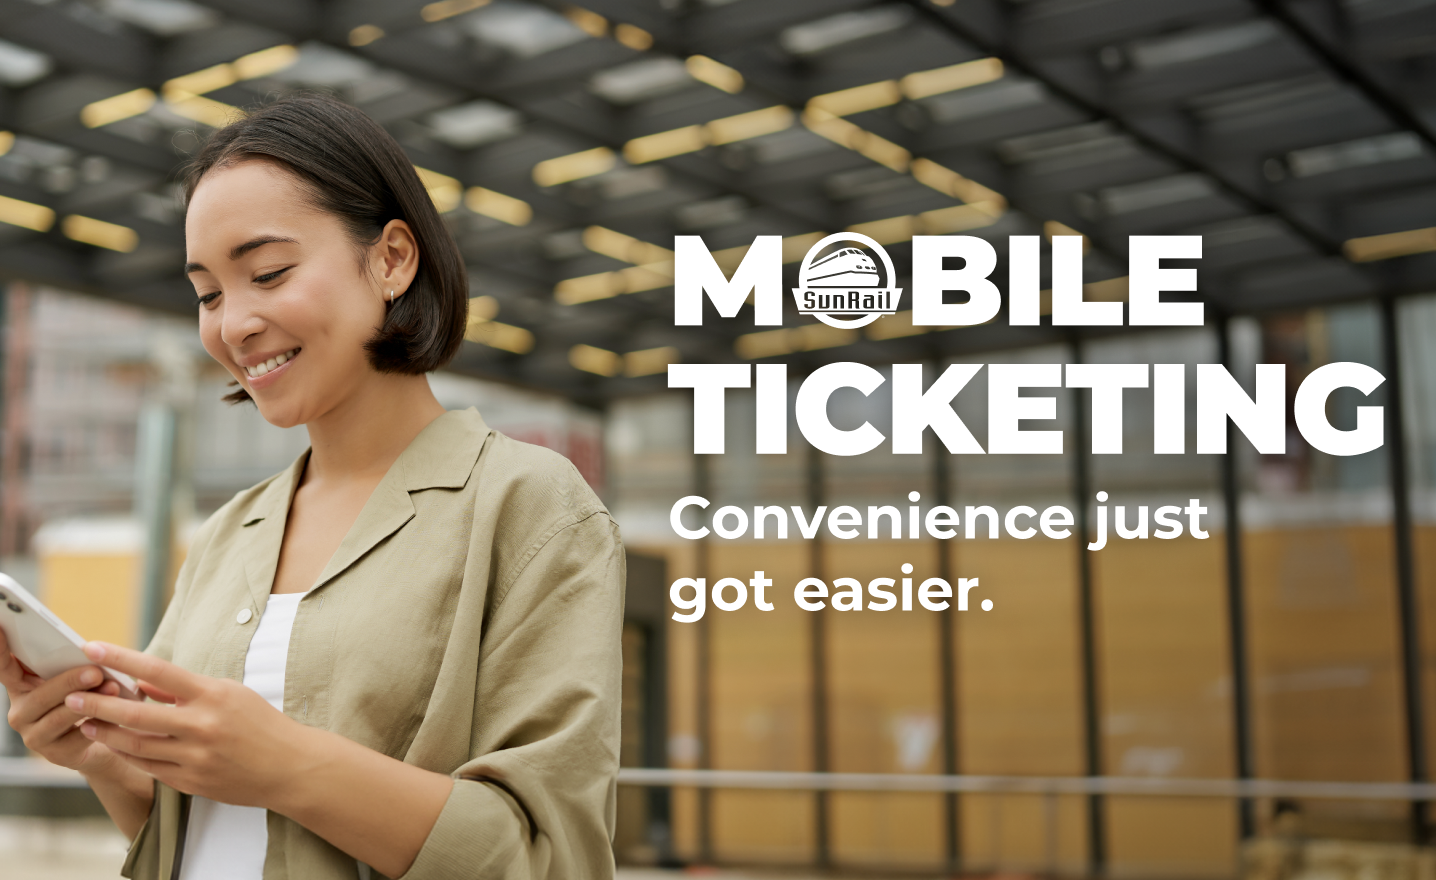 Mobile Ticketing - Convenience just got easier.